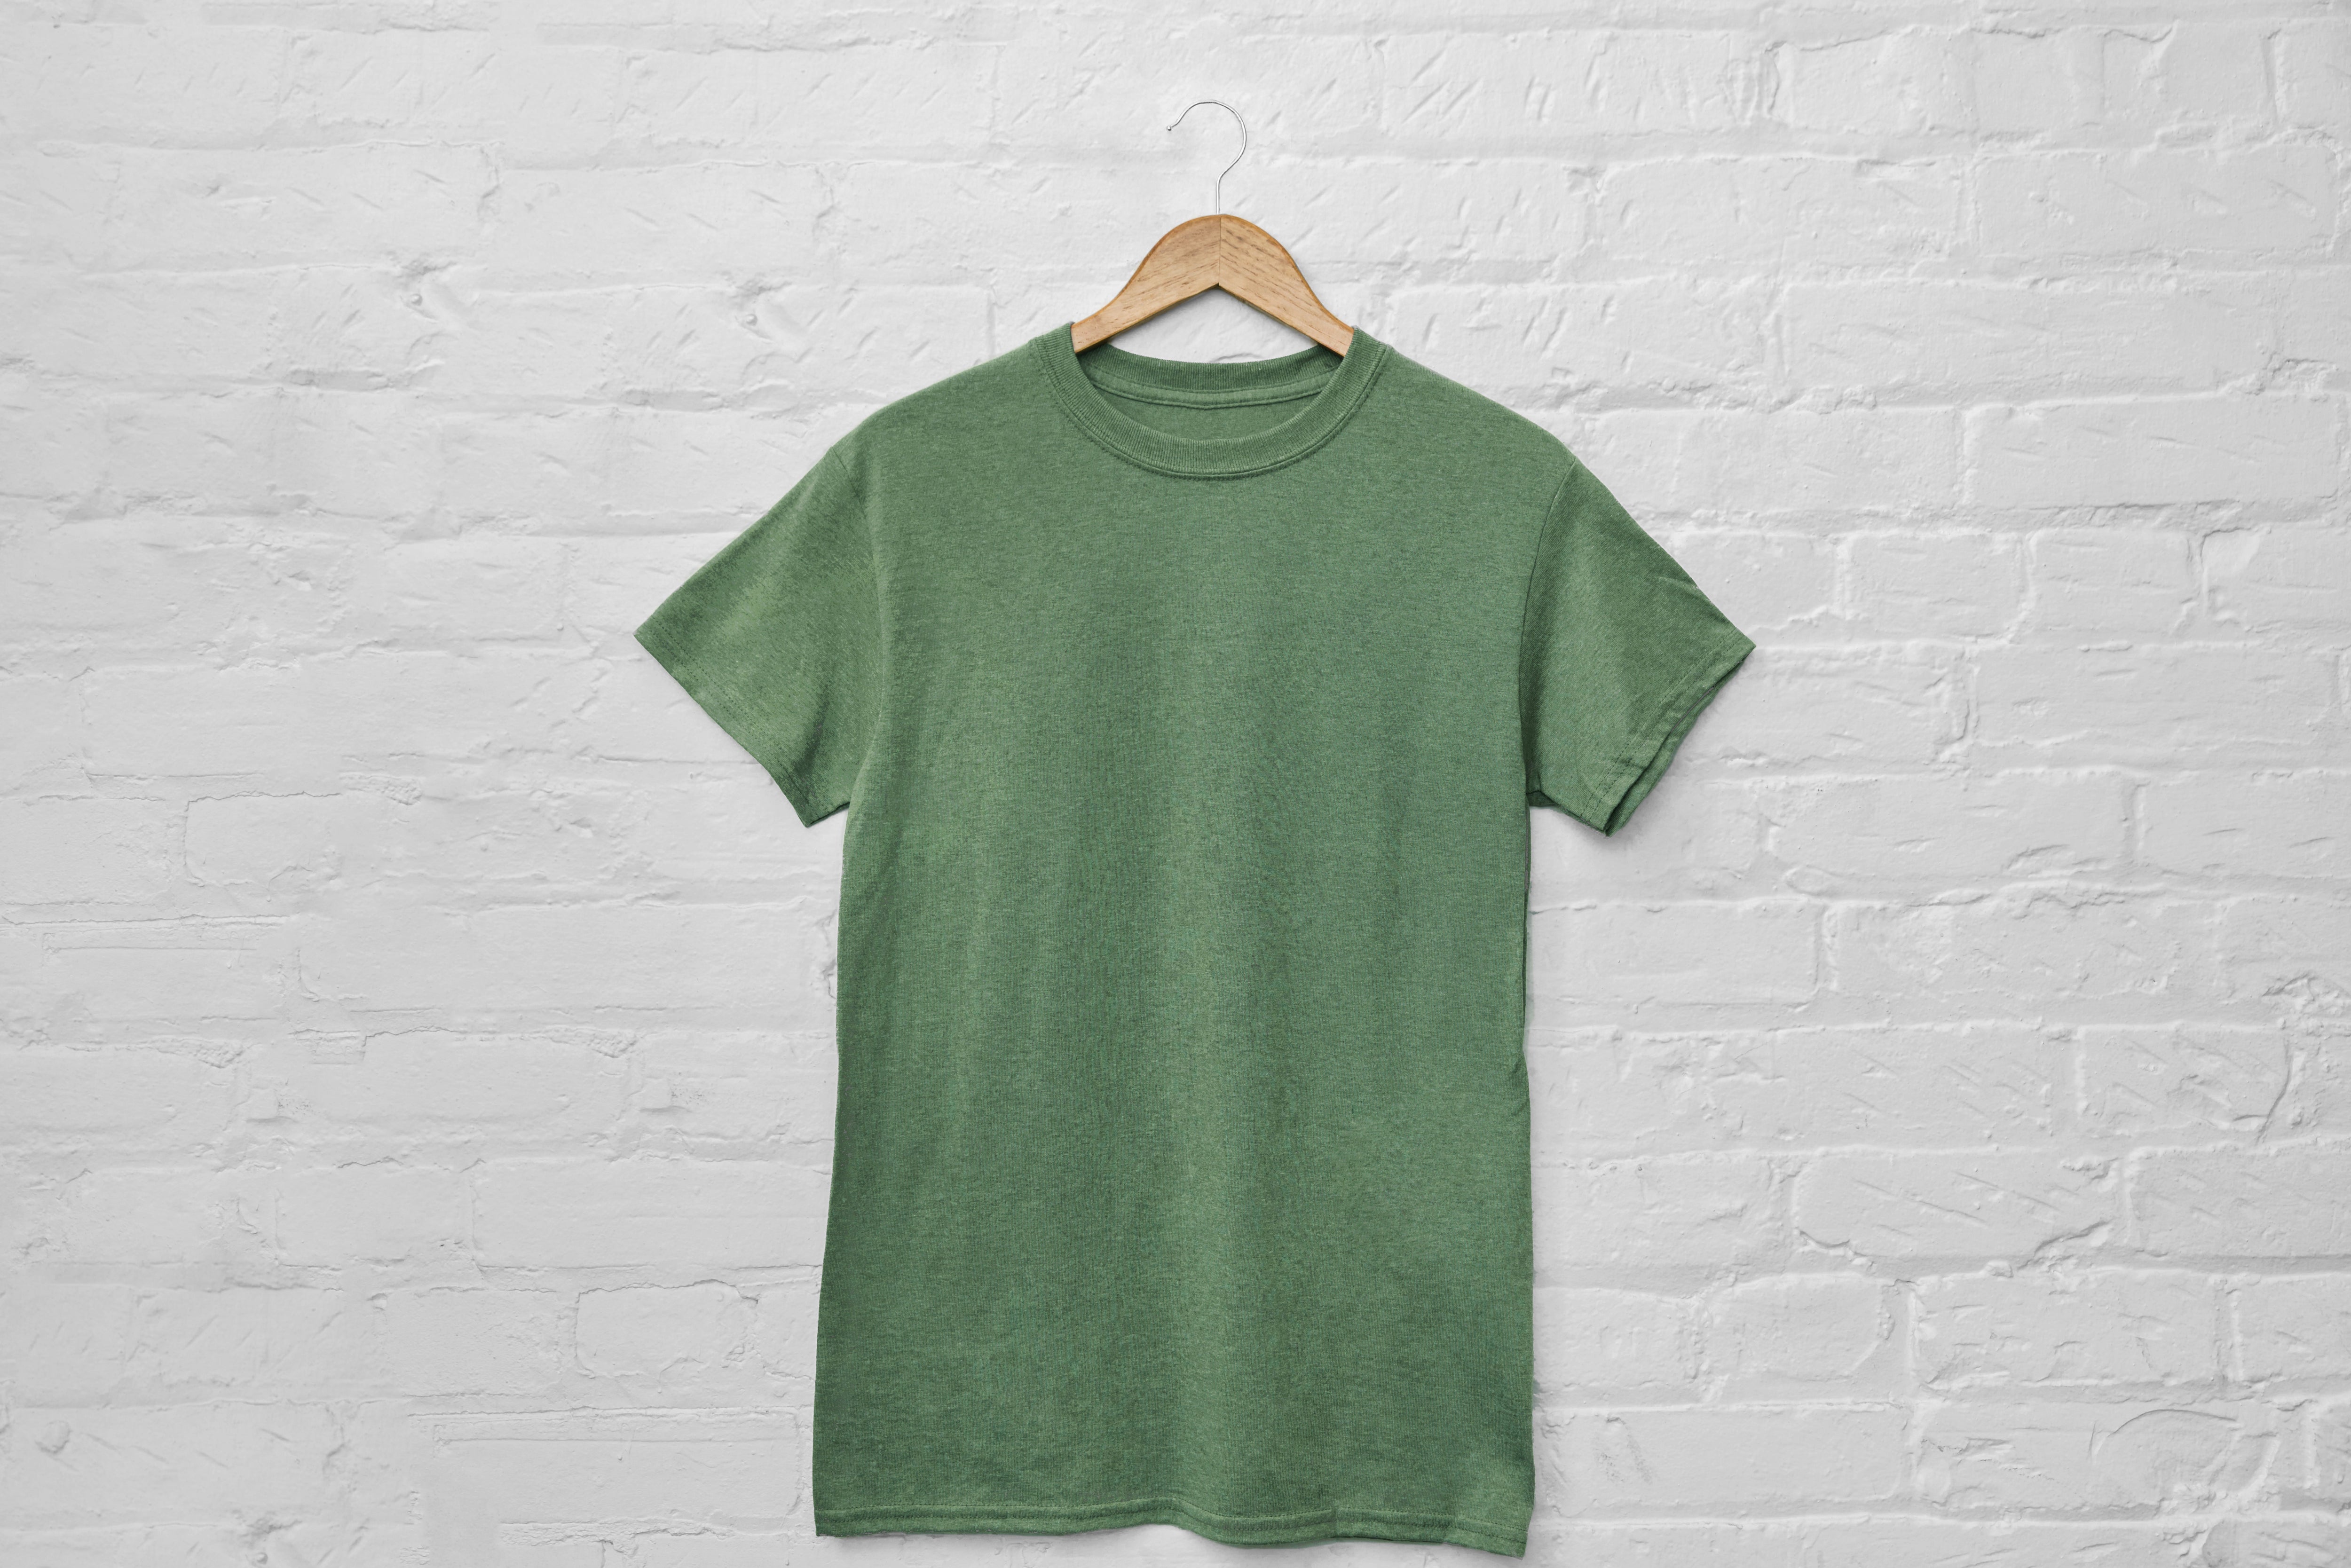 Example T-Shirt from Acme , Shirts for women